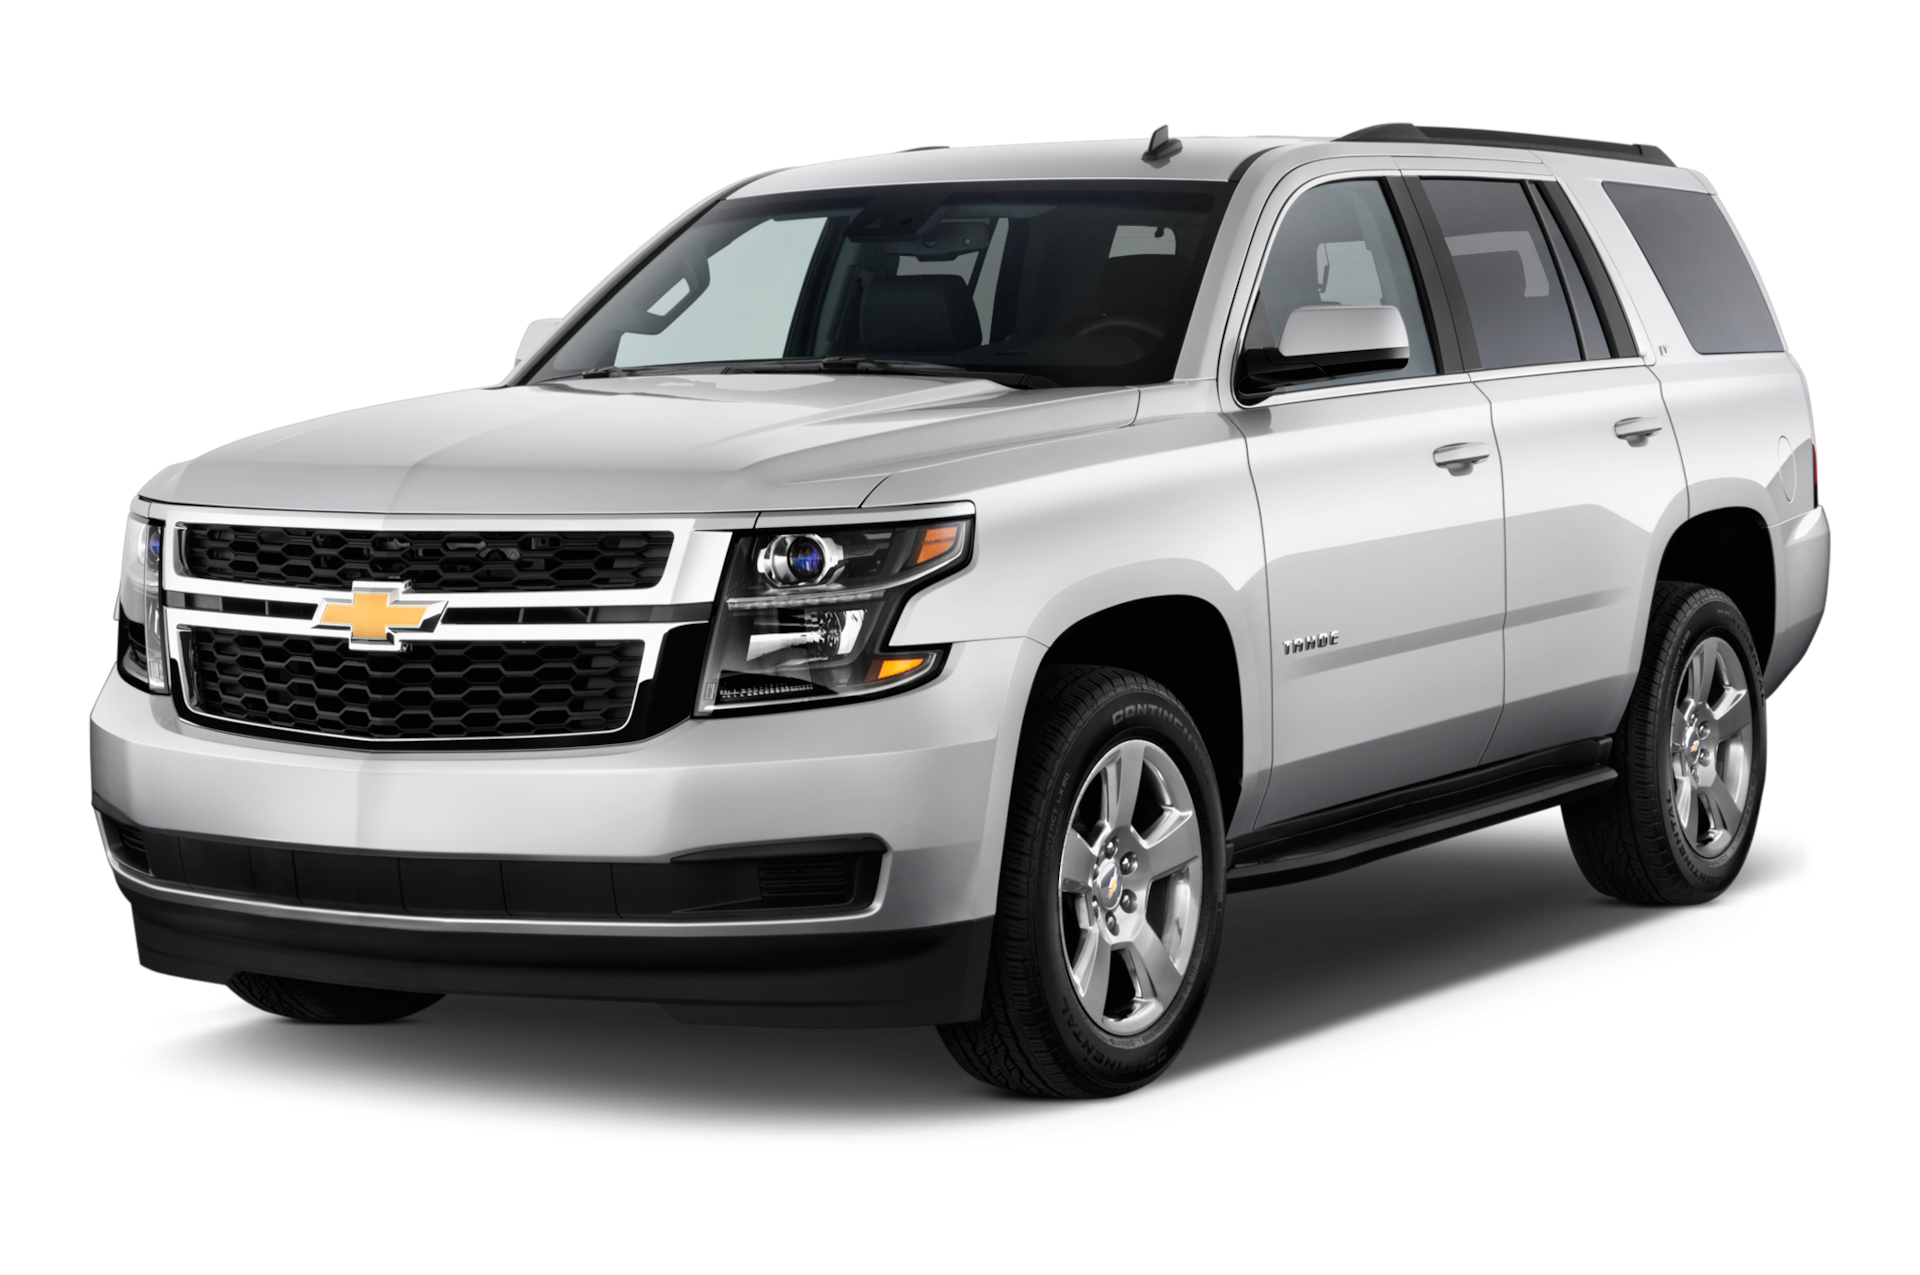 2015 Chevrolet Tahoe Prices, Reviews, and Photos - MotorTrend